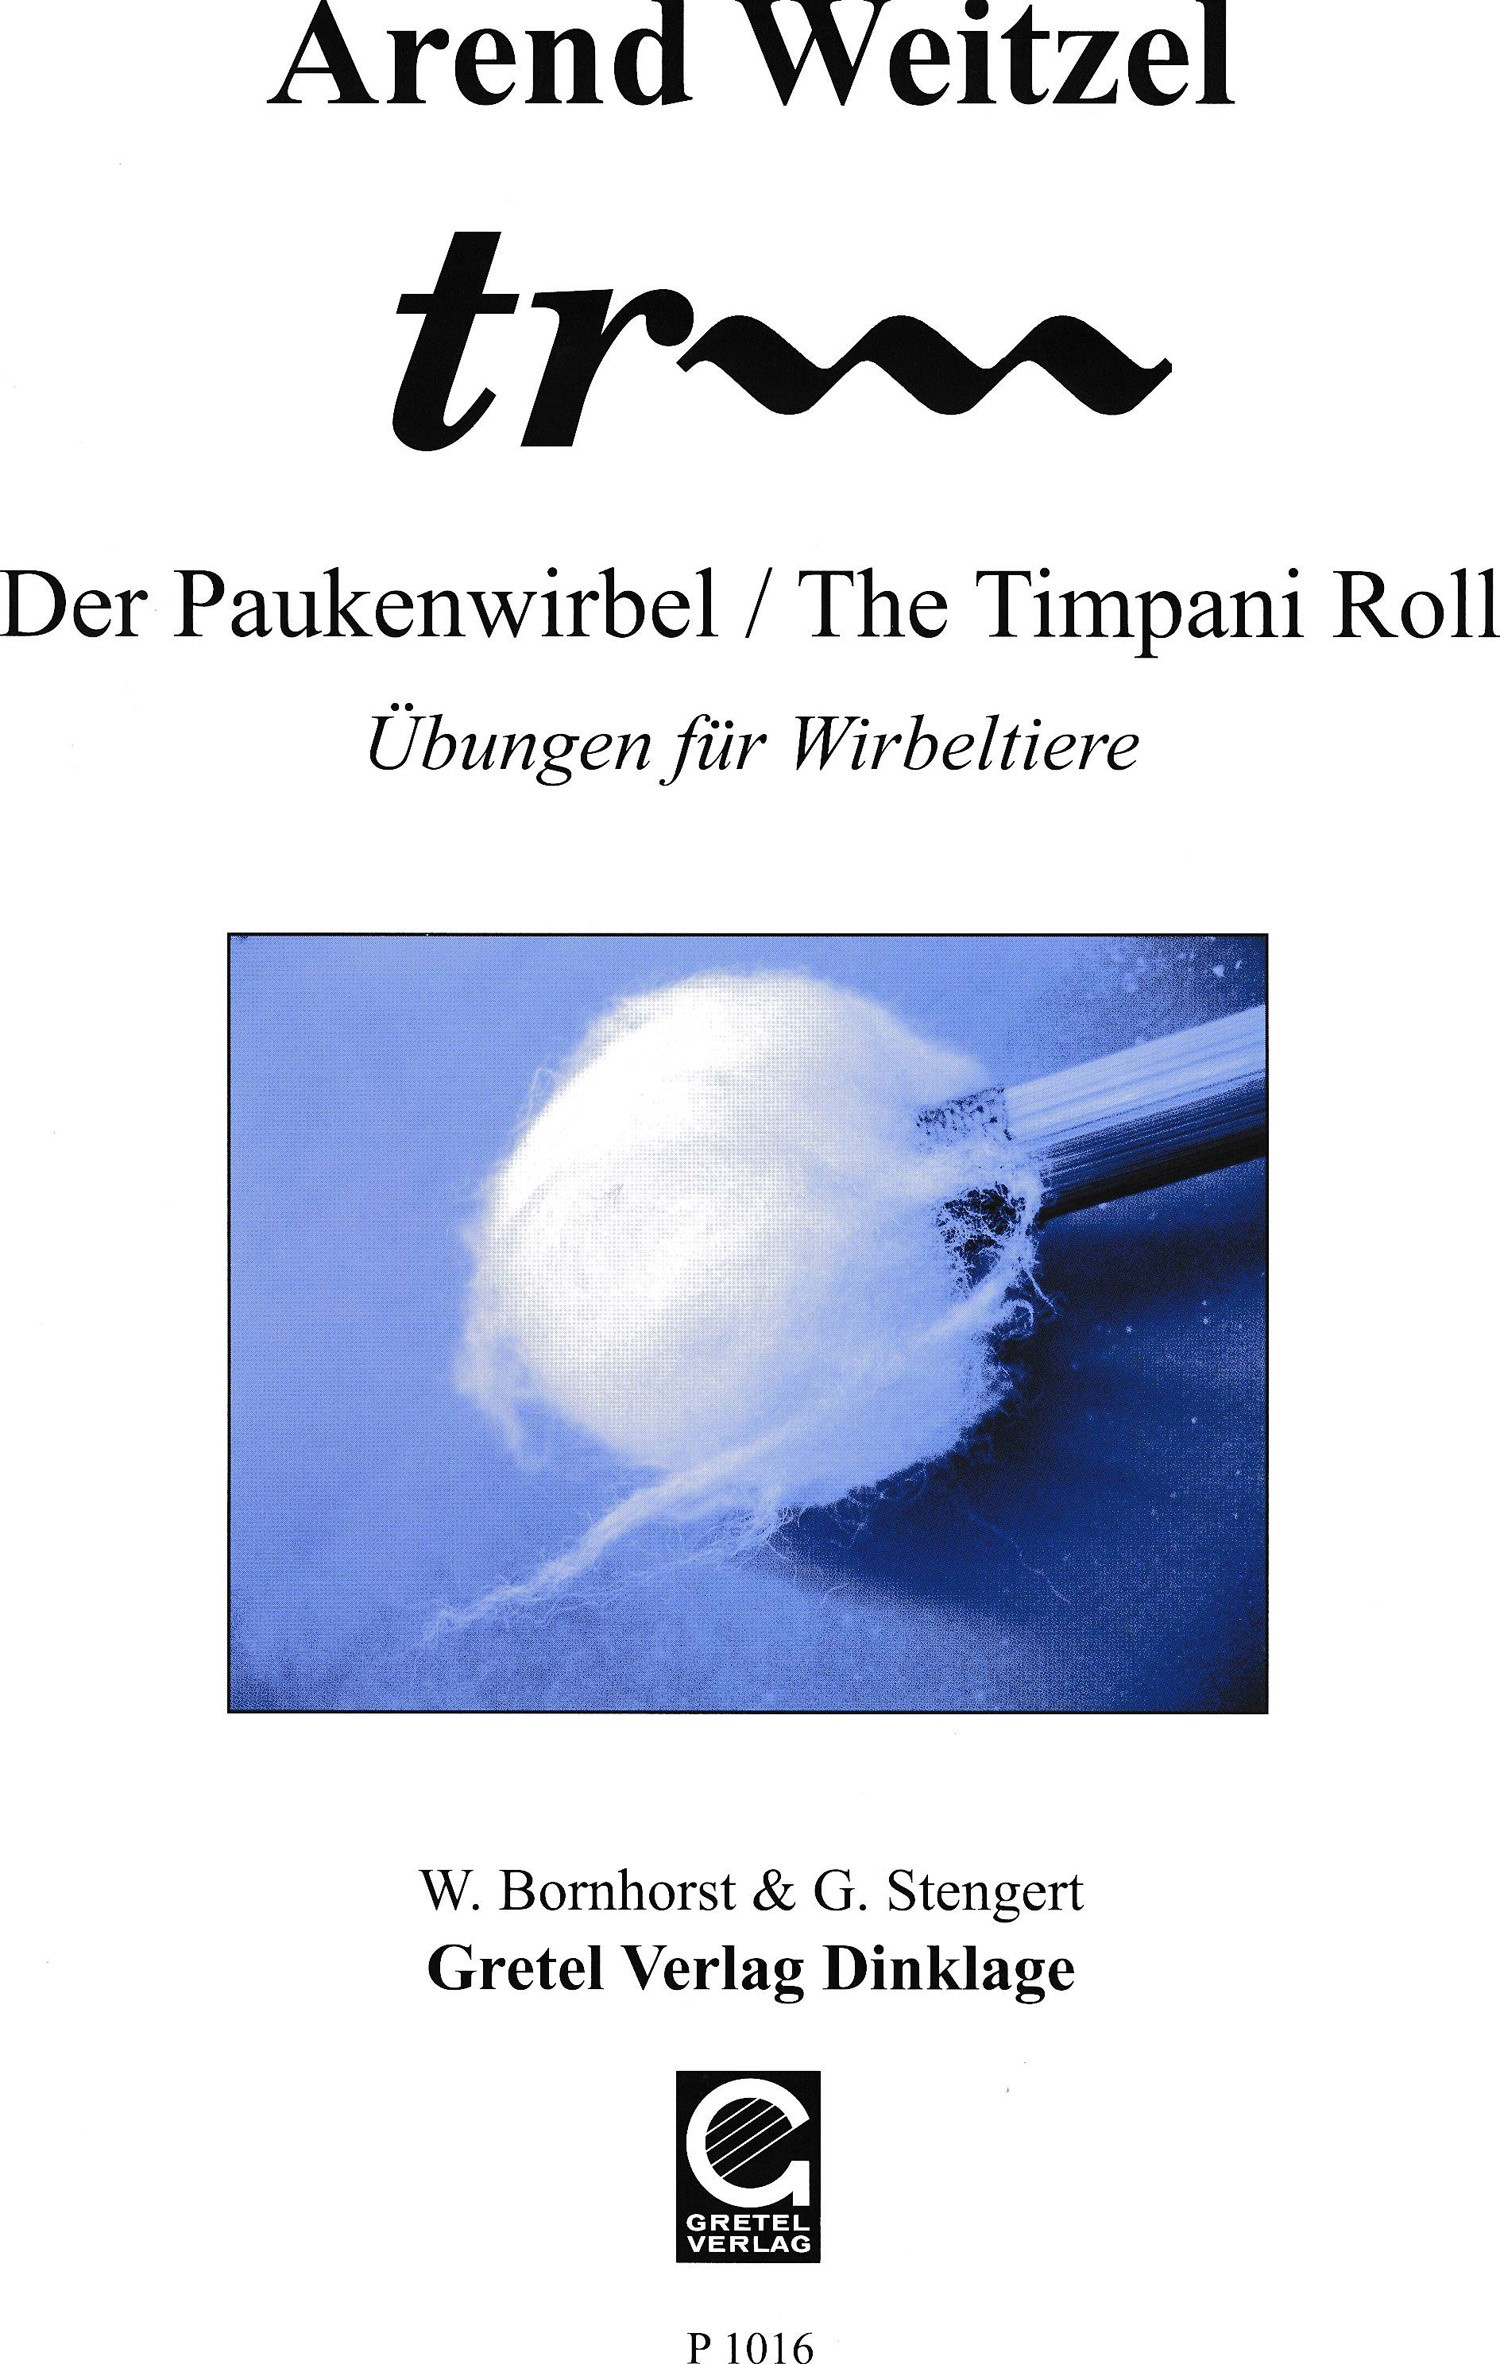 Trrr - The Timpani Roll by Arend Weitzel